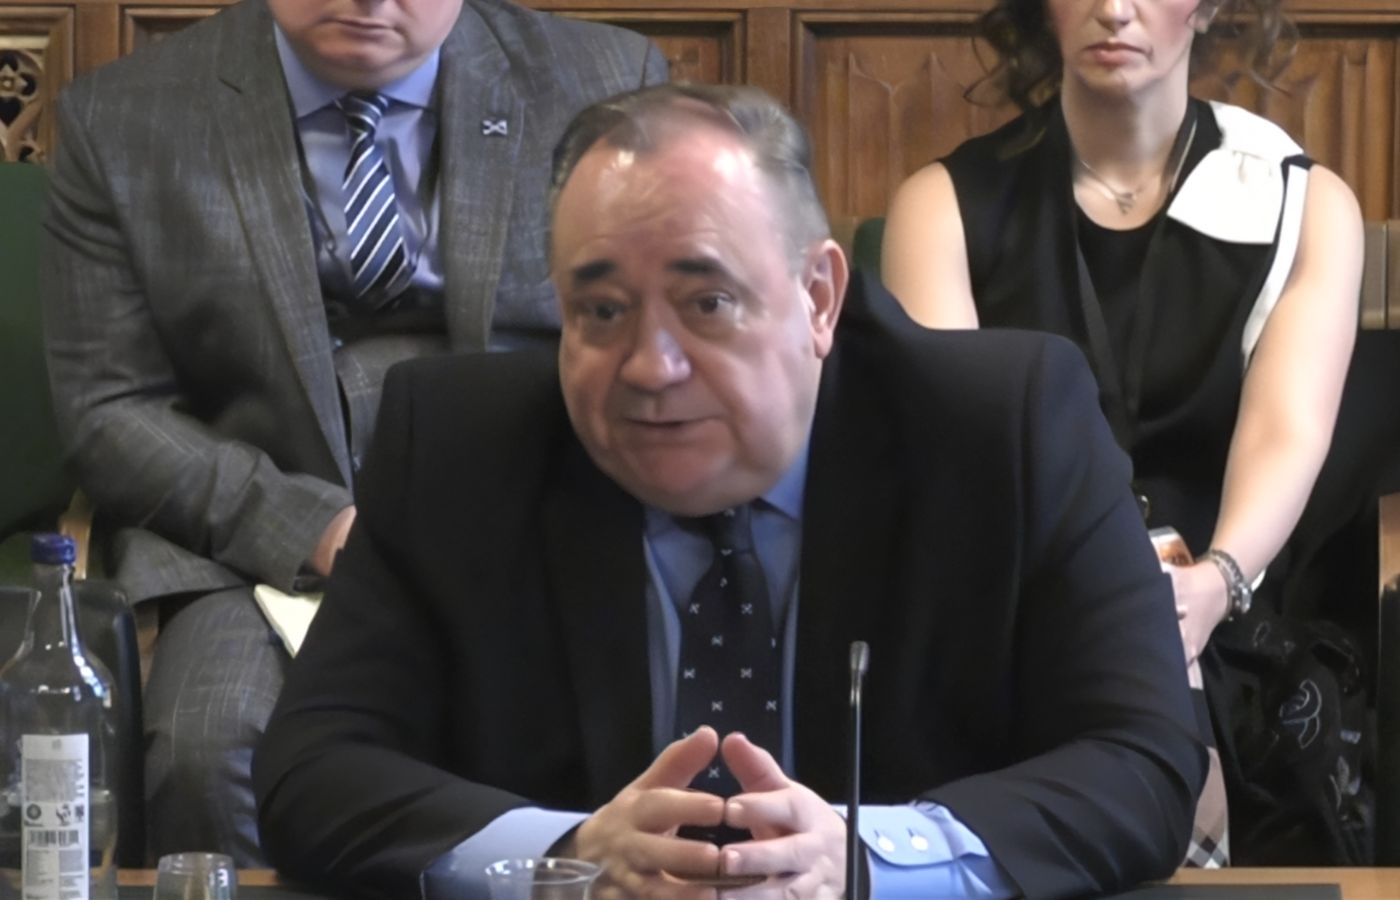 Alex Salmond was speaking to the Scottish Affairs Committee's inquiry into relations between the Scottish and UK governments.